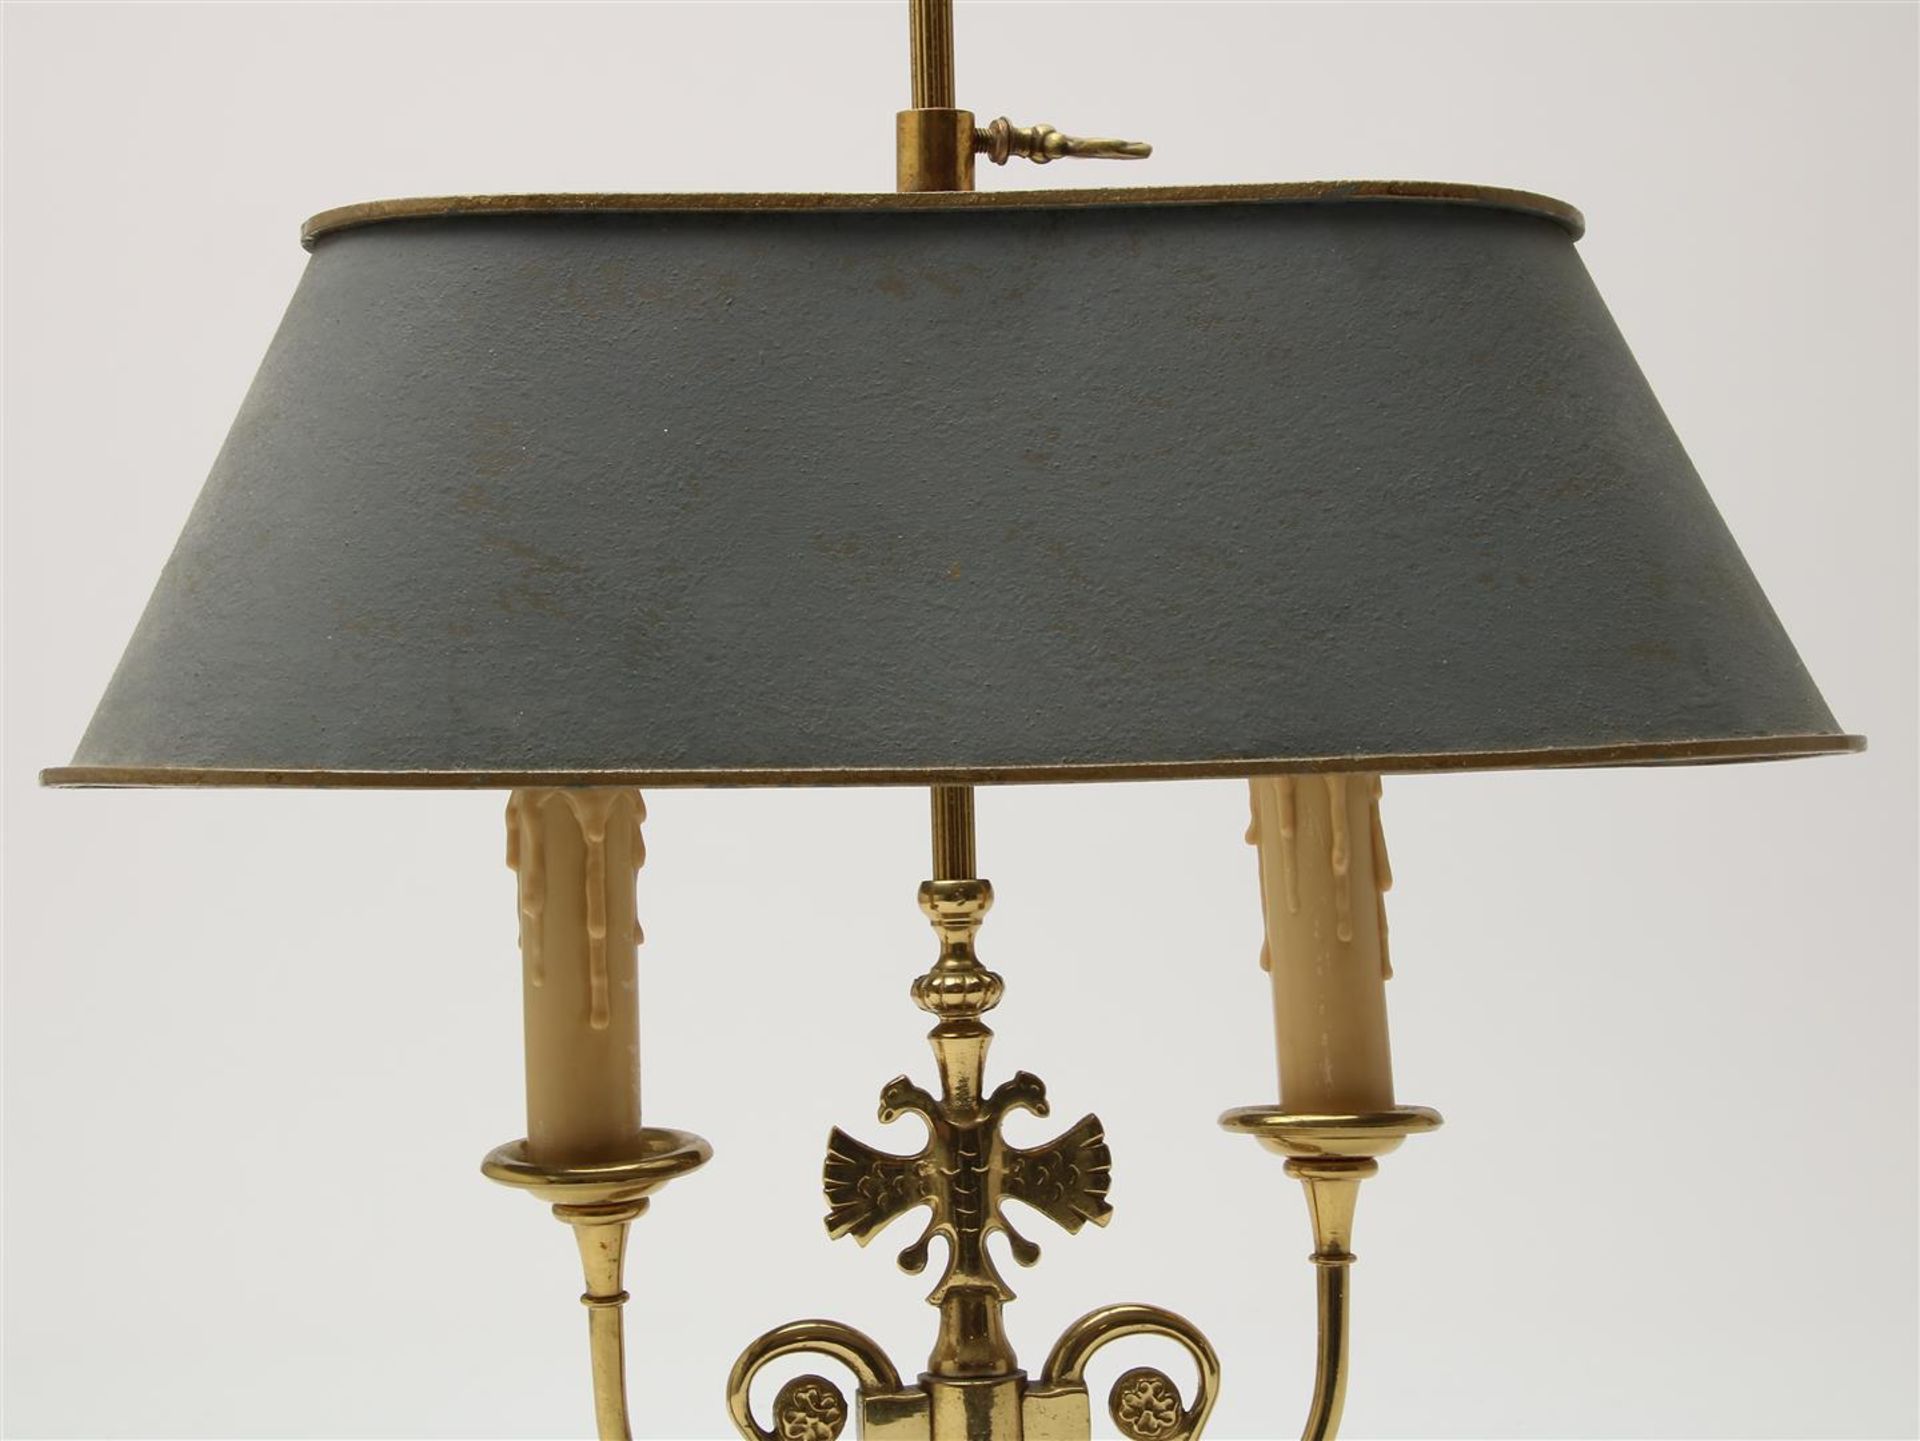 Copper bouillotte table lamp with metal shade, 52 cm. - Image 3 of 4